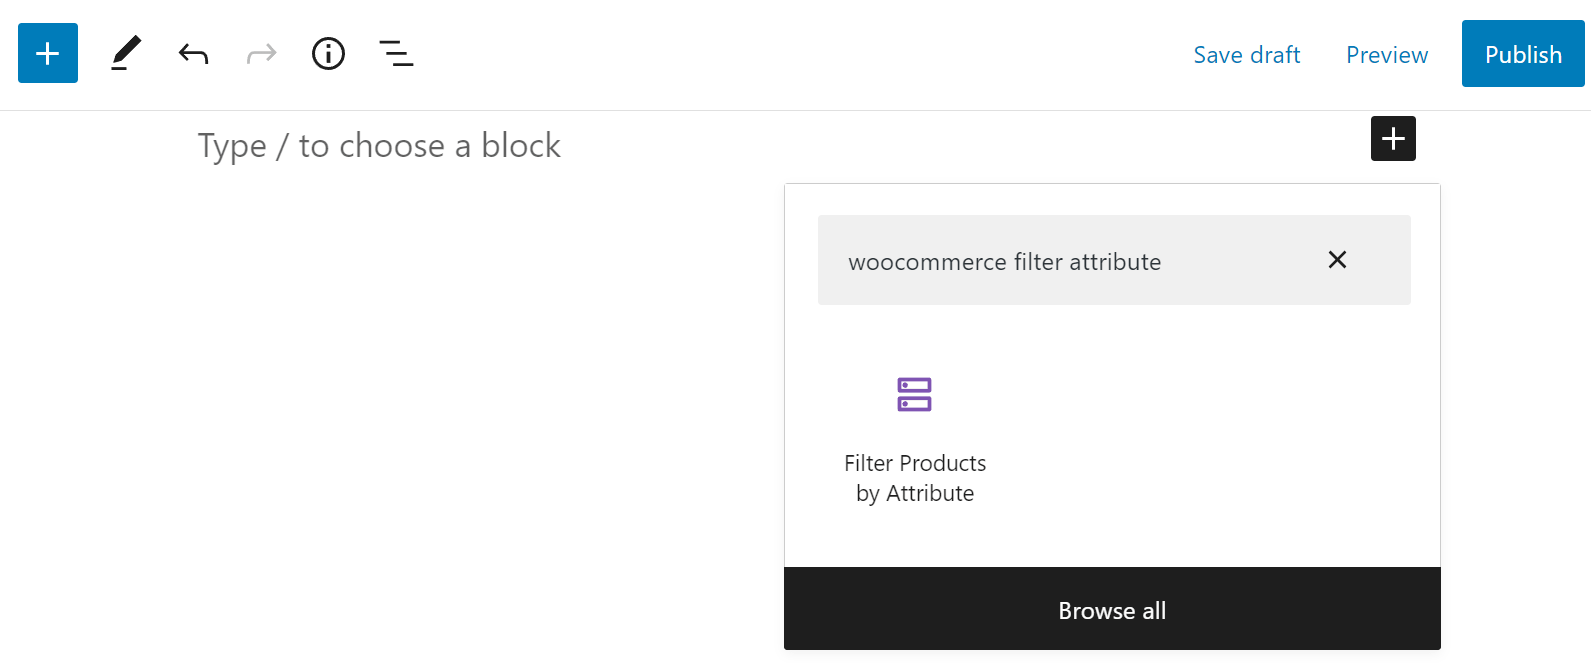 Searching for the WooCommerce filter attribute block.